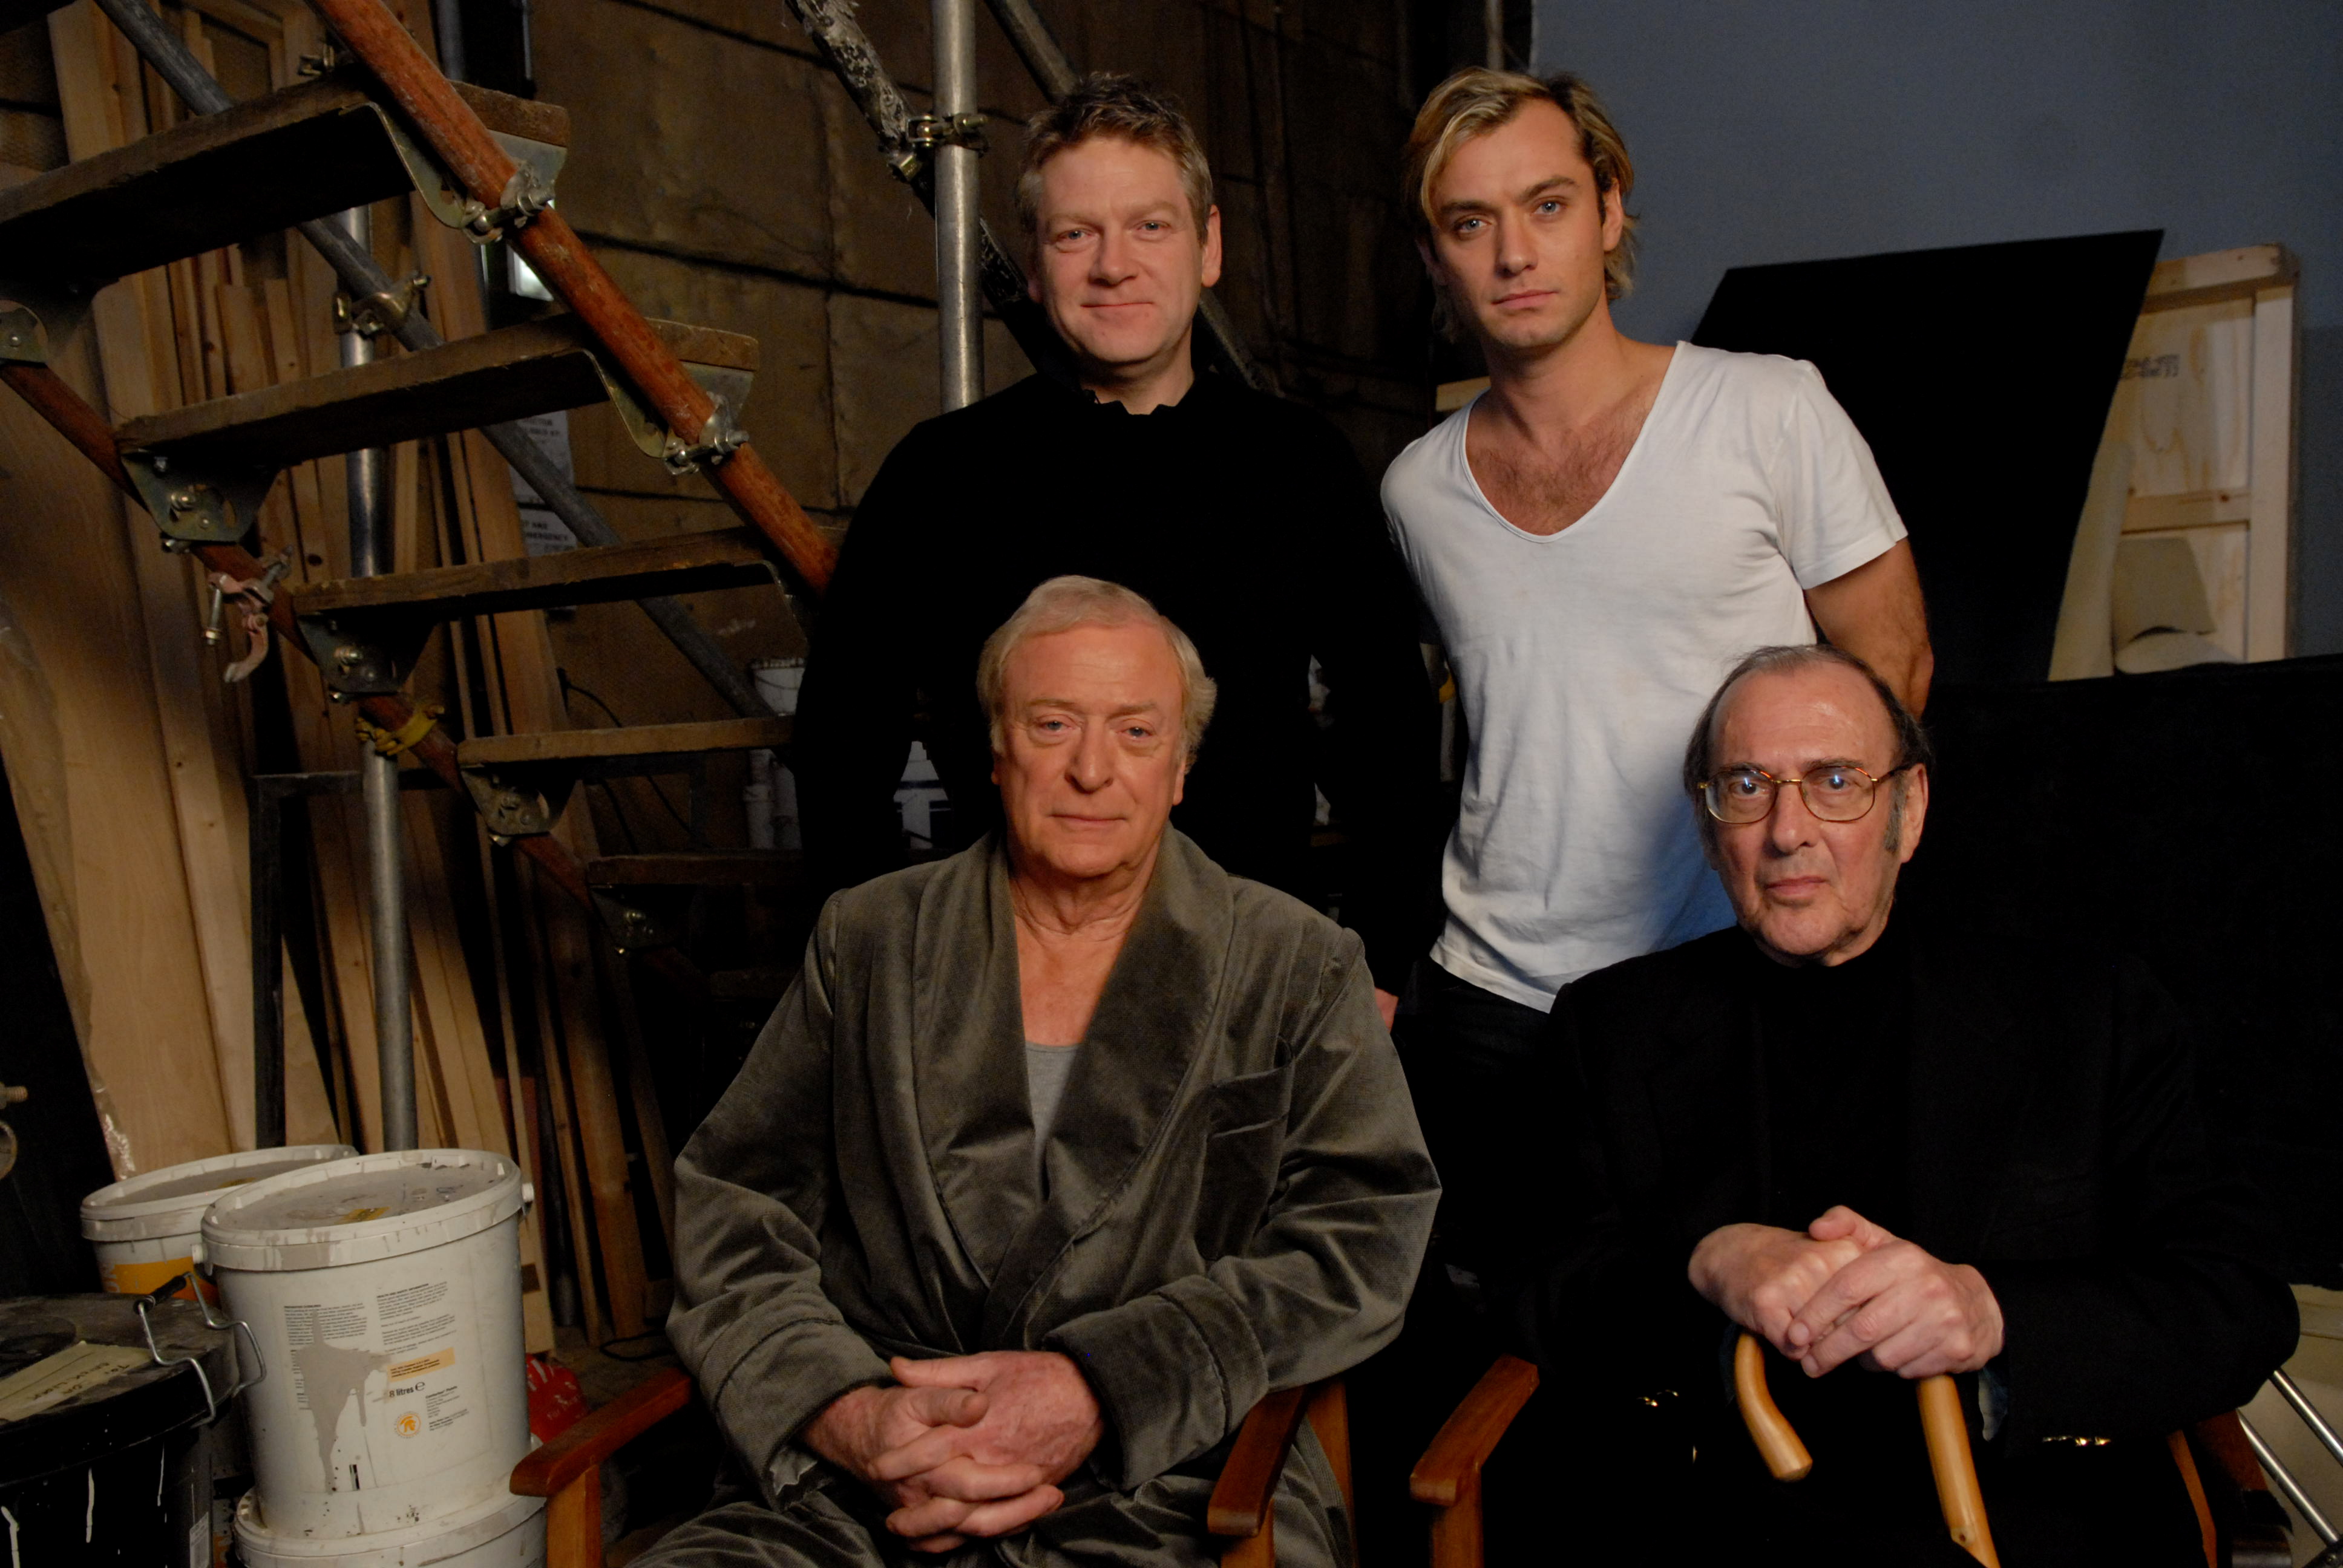 Harold Pinter. Sleuth 2004. K Branagh, Jude Law, Michael Caine